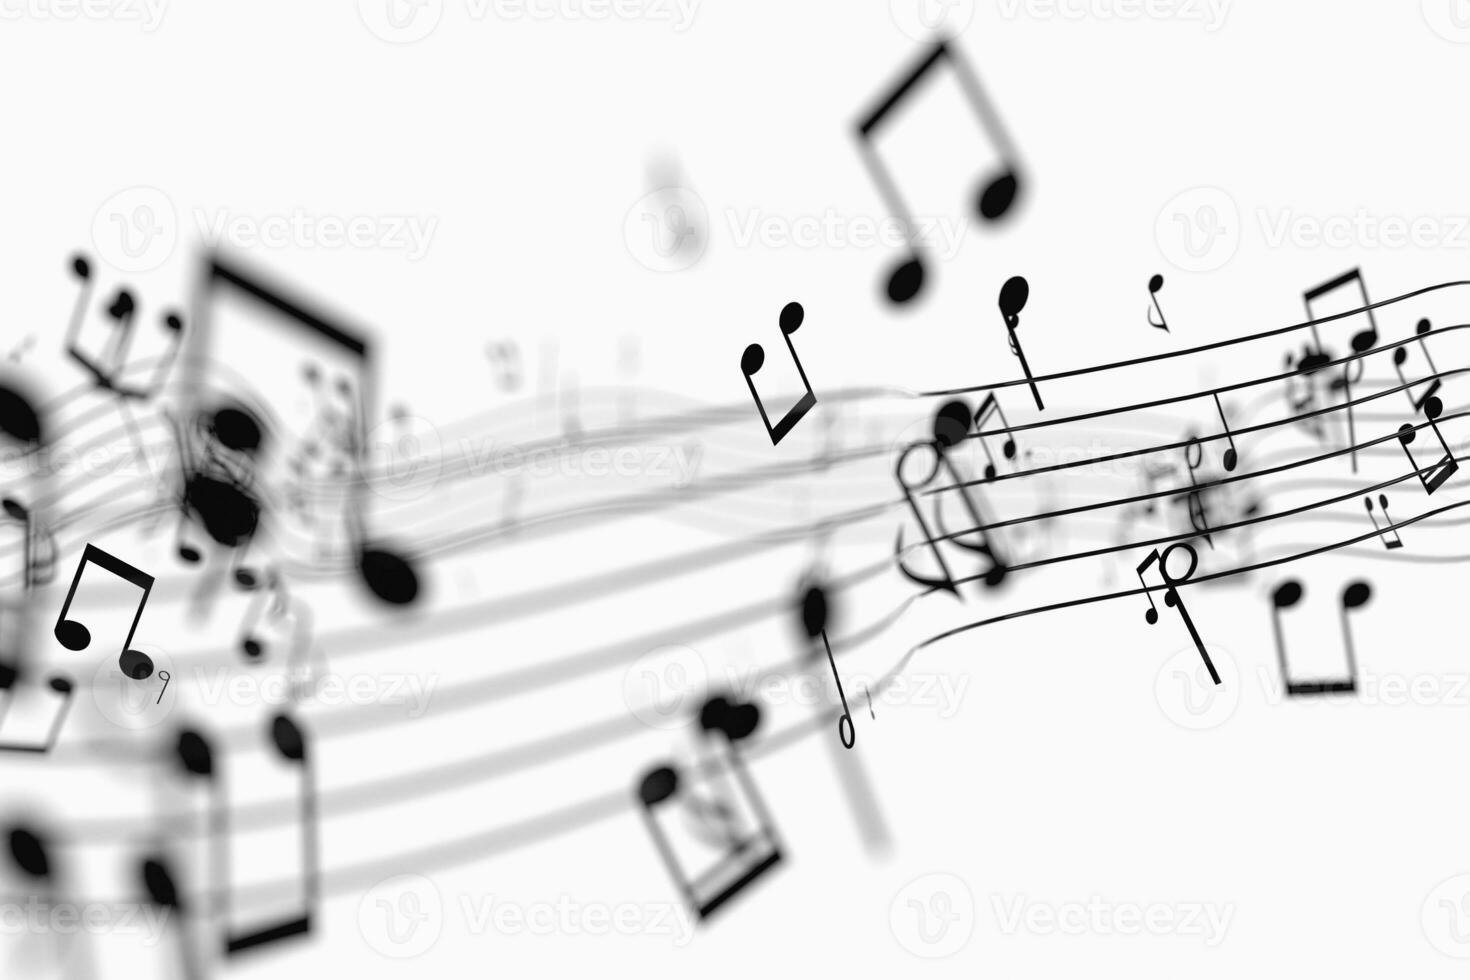 Black music notes with white background, 3d rendering. photo